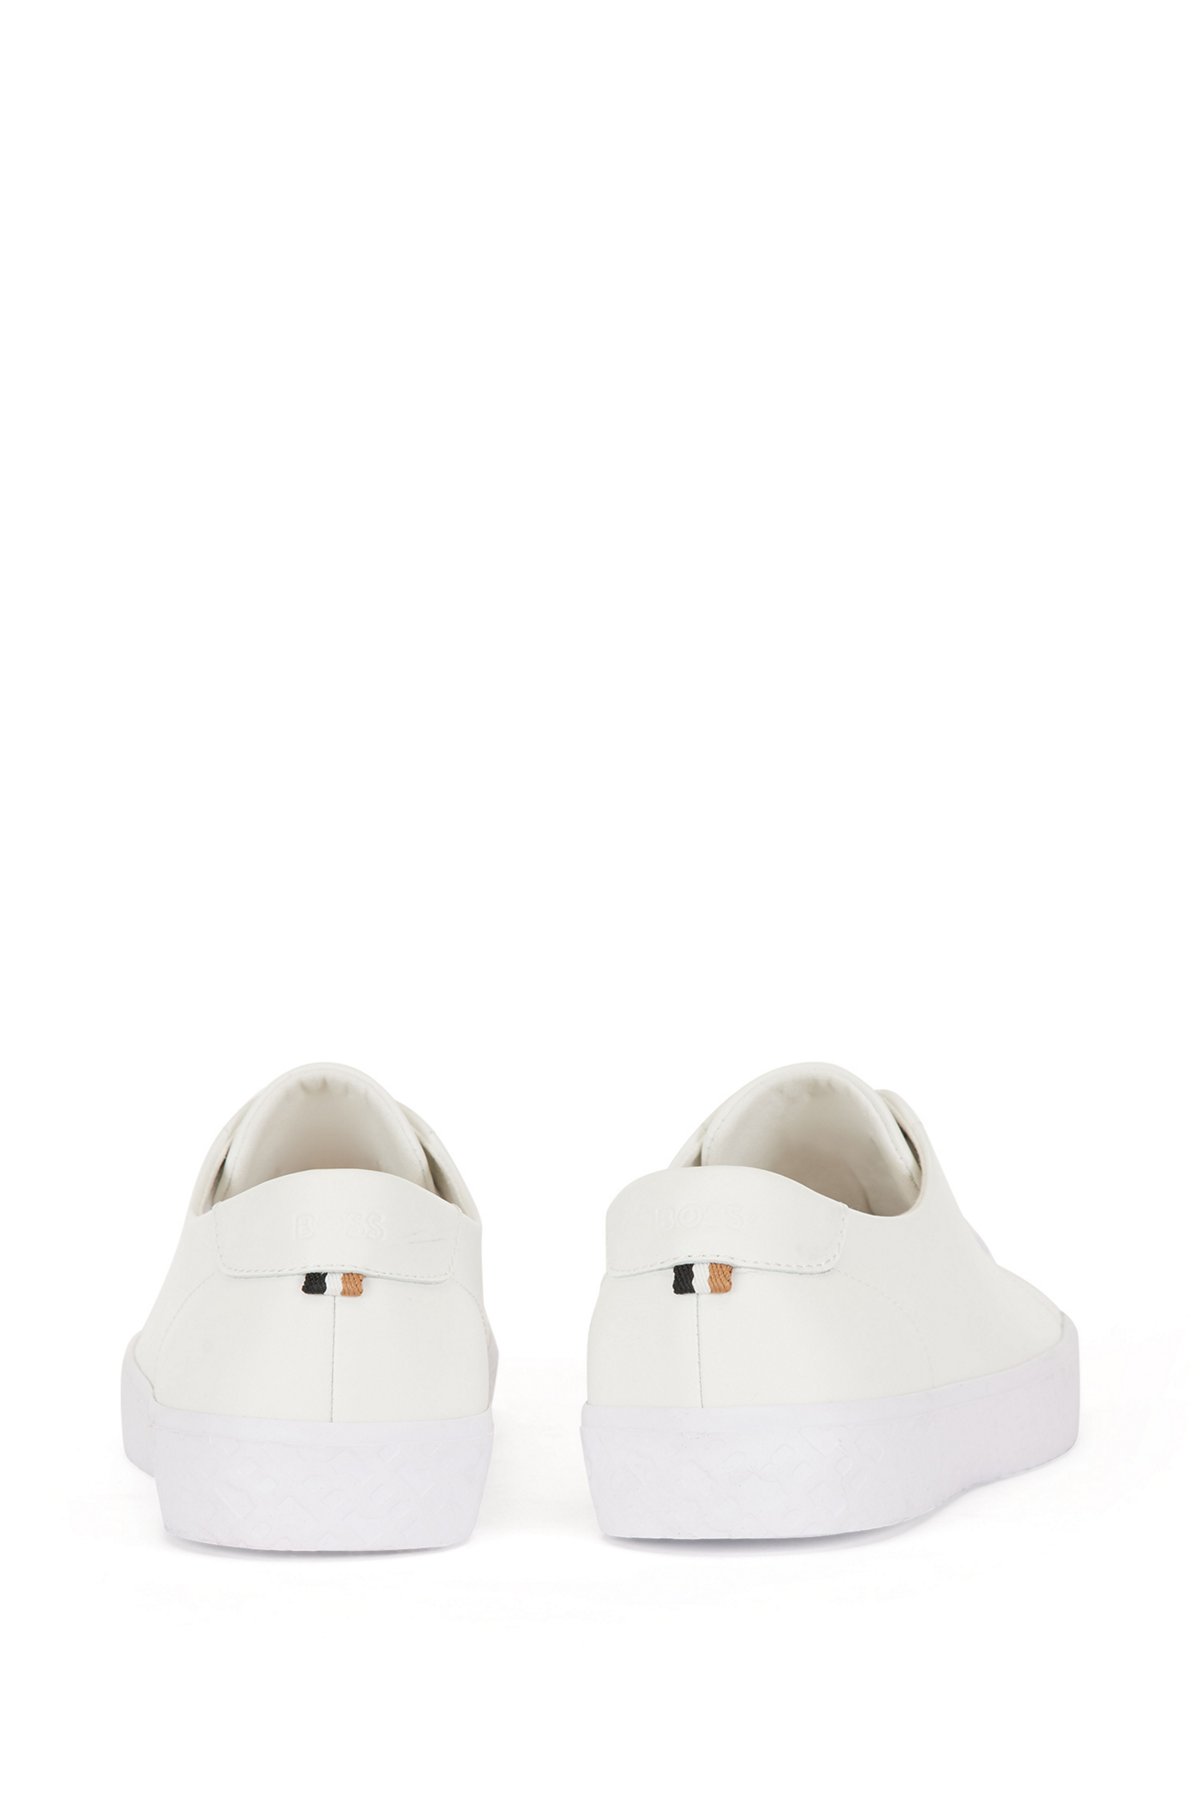 Lace-up trainers in technical material with monogrammed outsole, White